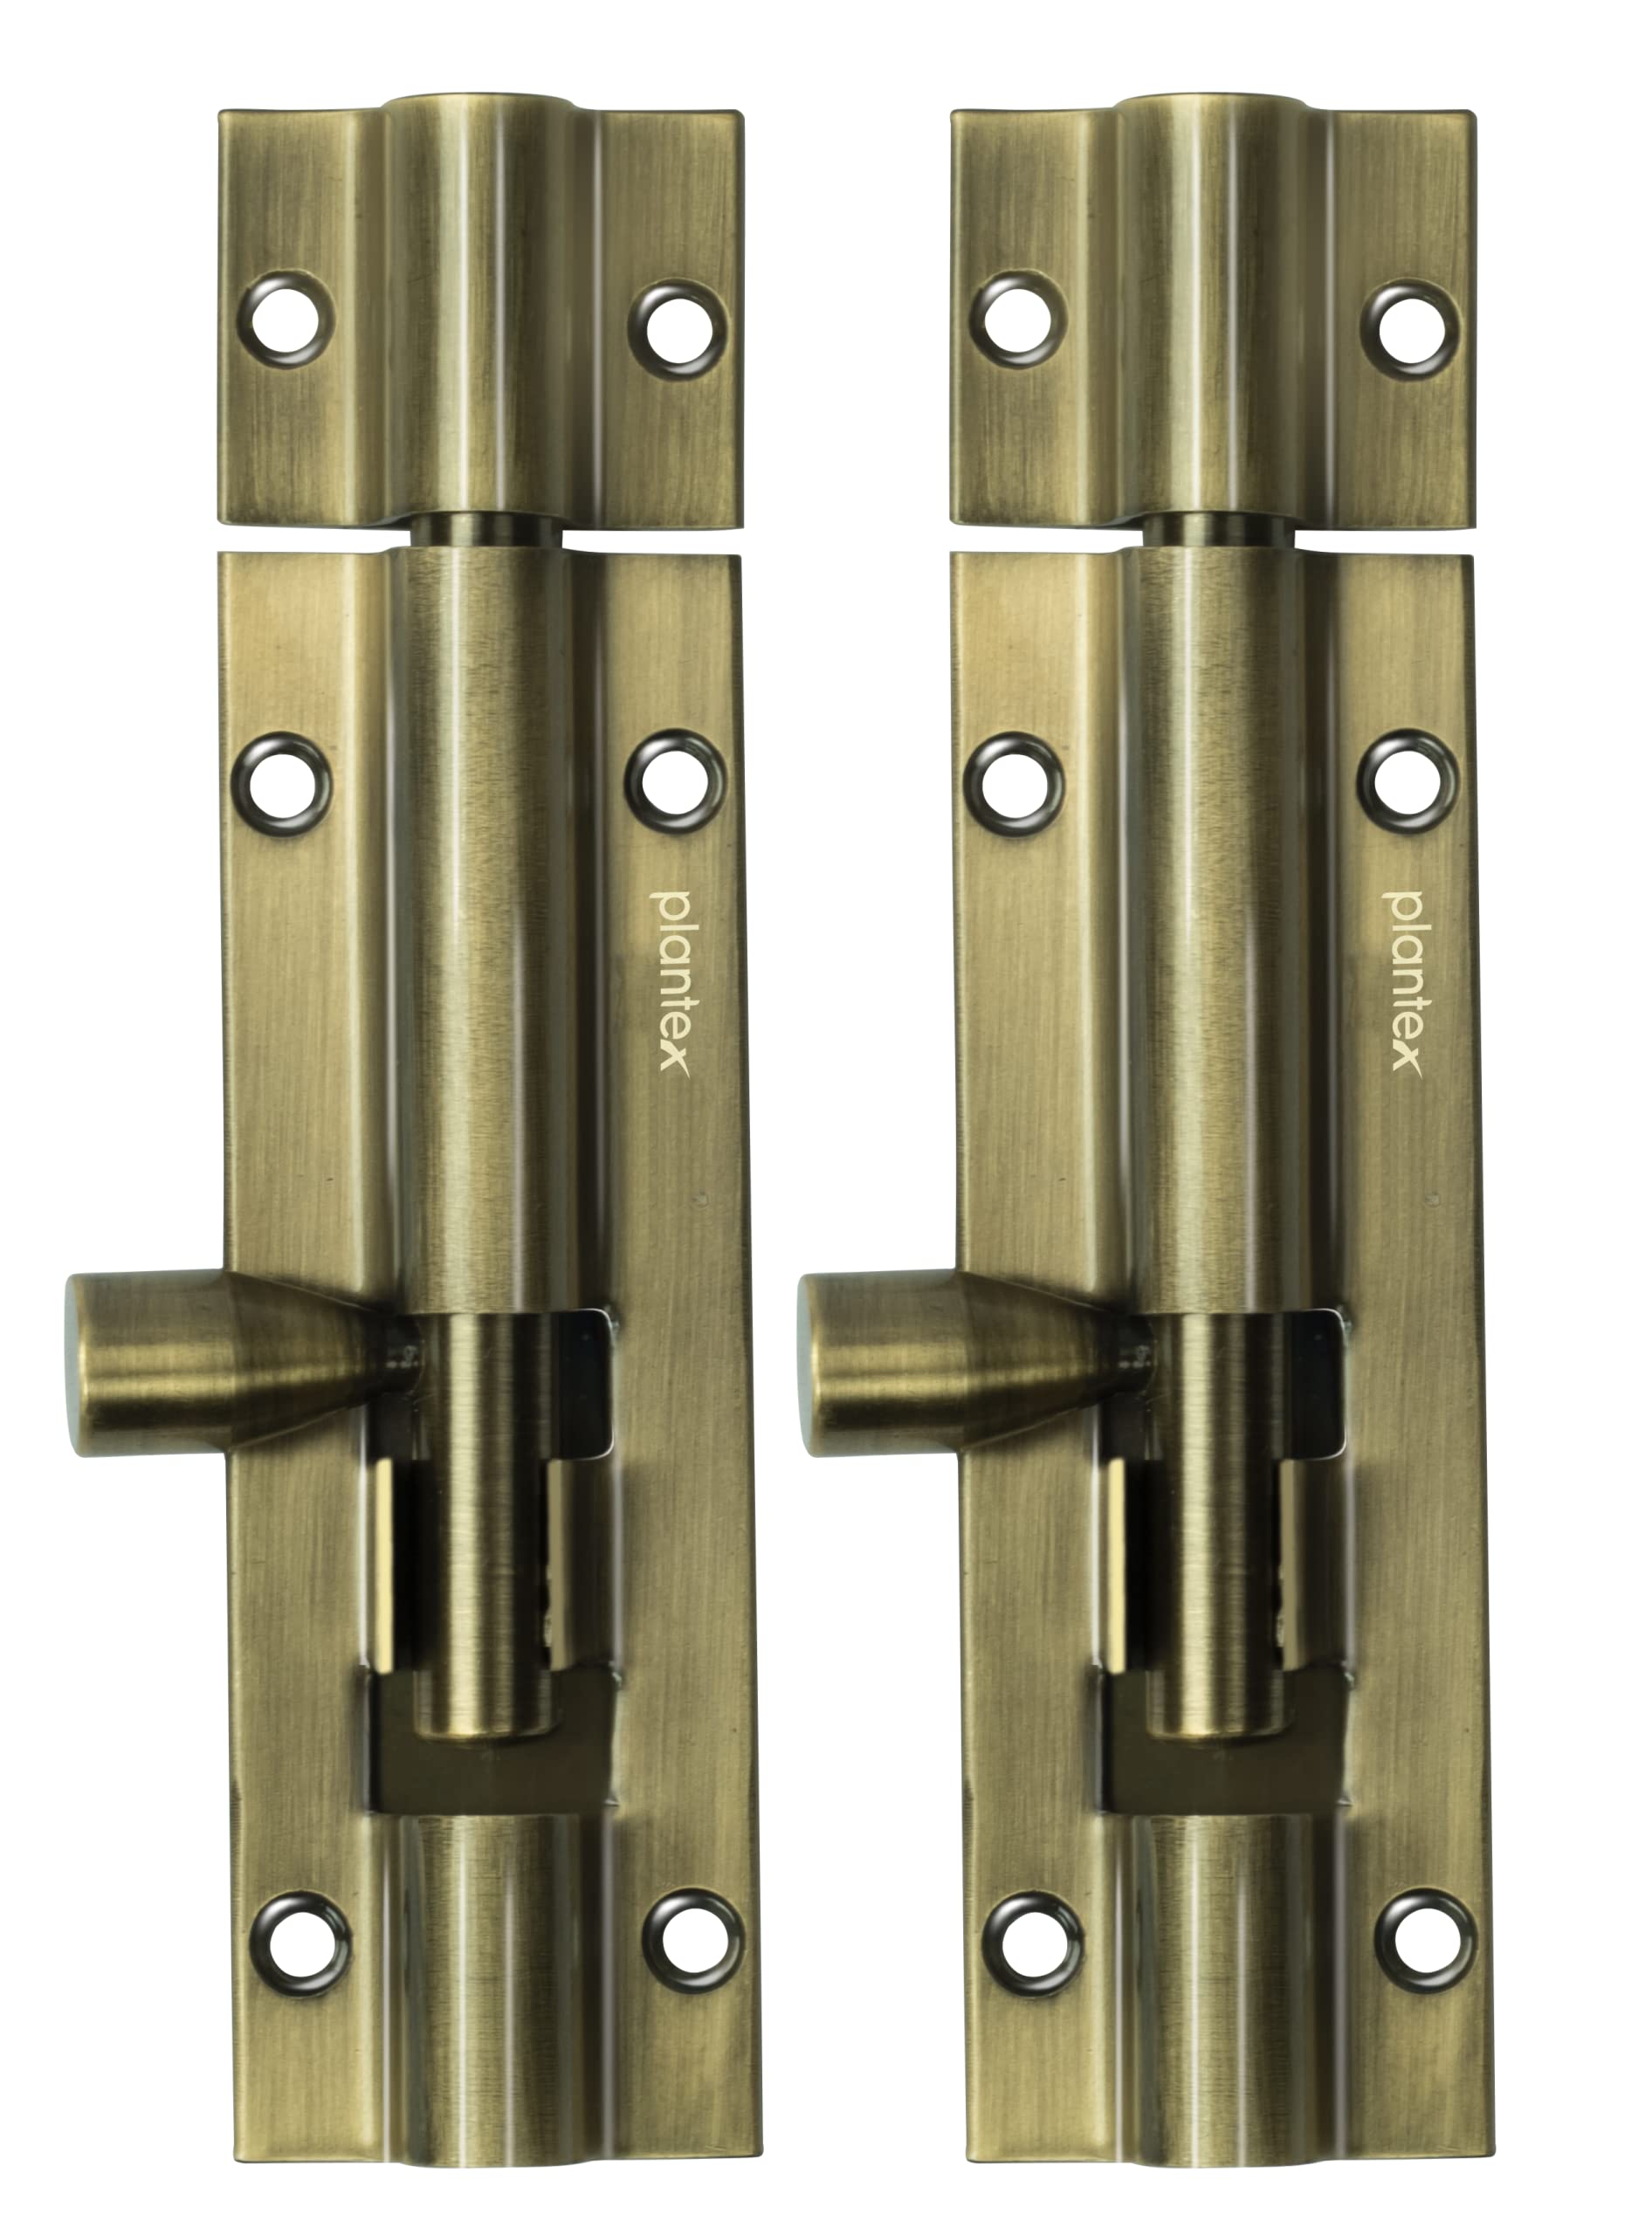 Plantex 4- inches Long Tower Bolt for Door/Windows/Wardrobe - Pack of 2 (Antique)